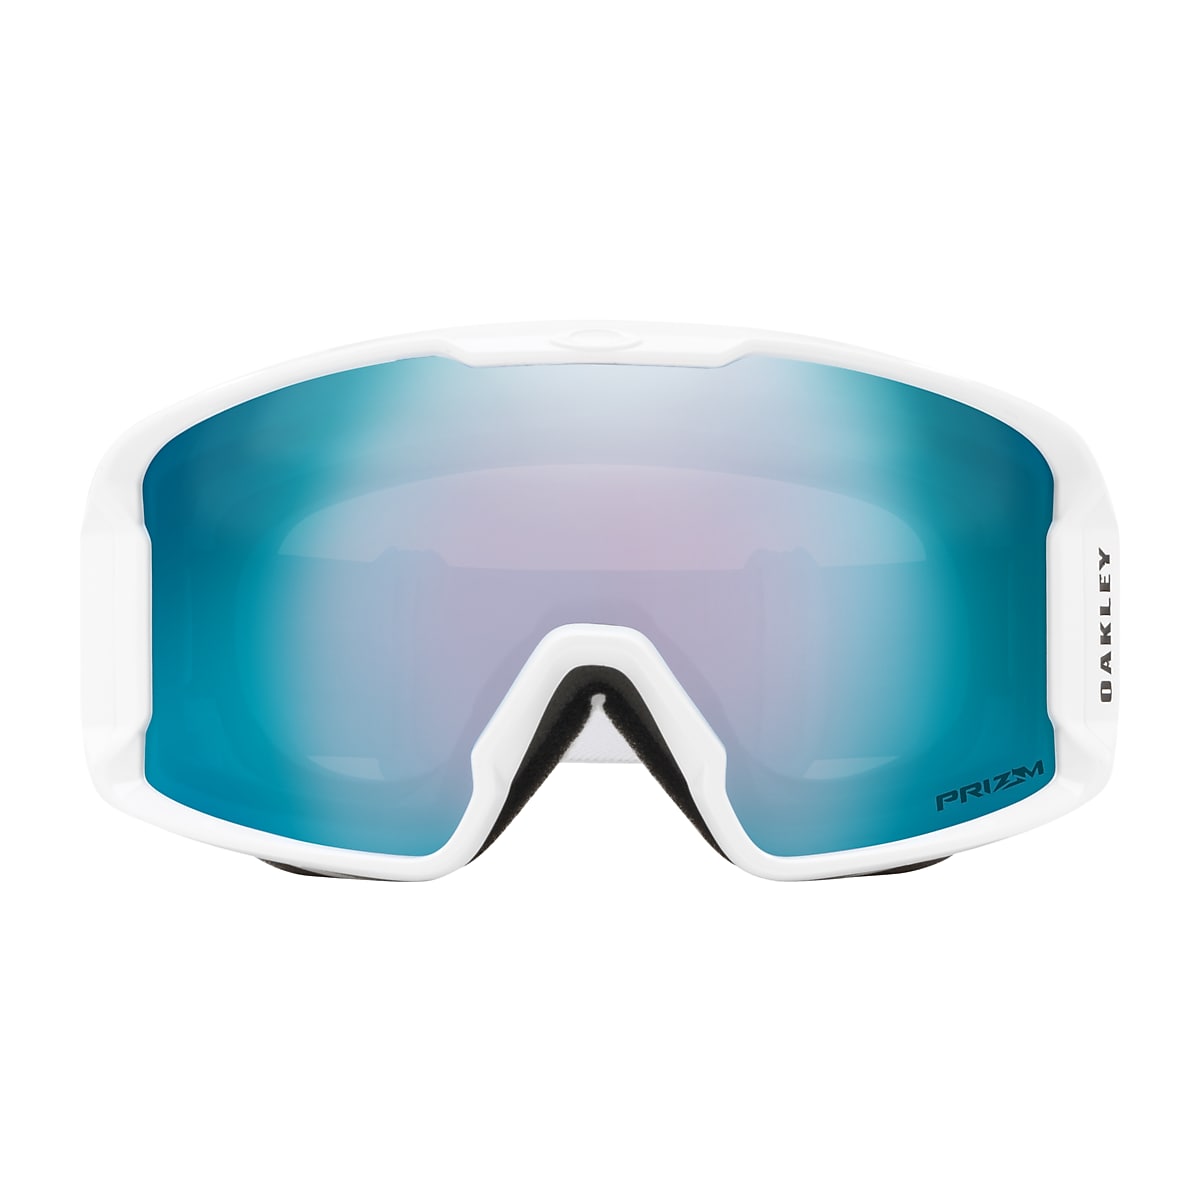 LINEMINER SNOW FACTORY PILOT WHITEOUT Snow Goggles